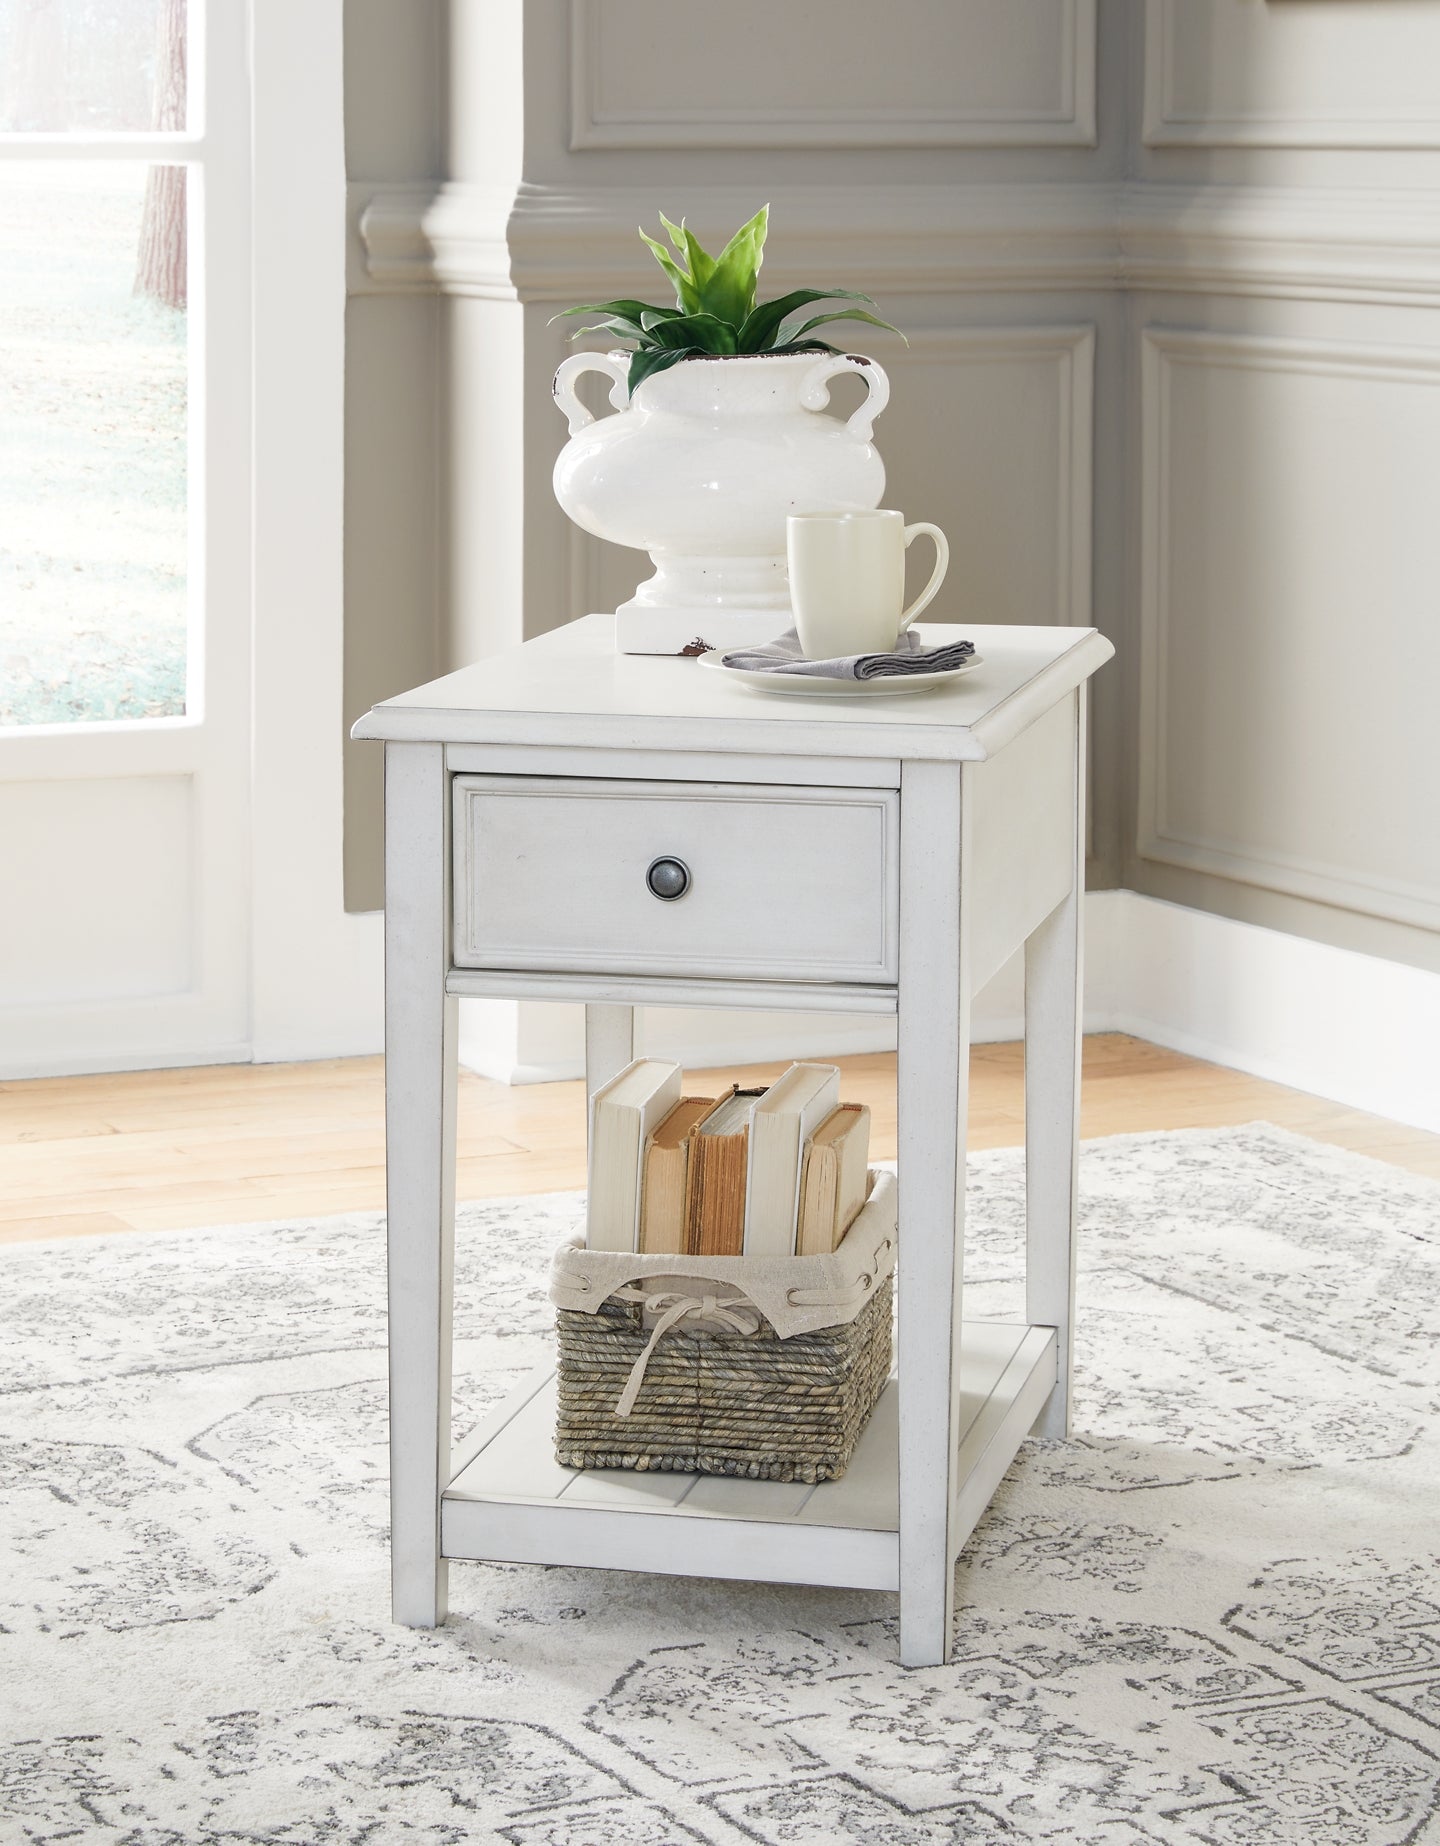 Kanwyn 2 End Tables Rent Wise Rent To Own Jacksonville, Florida